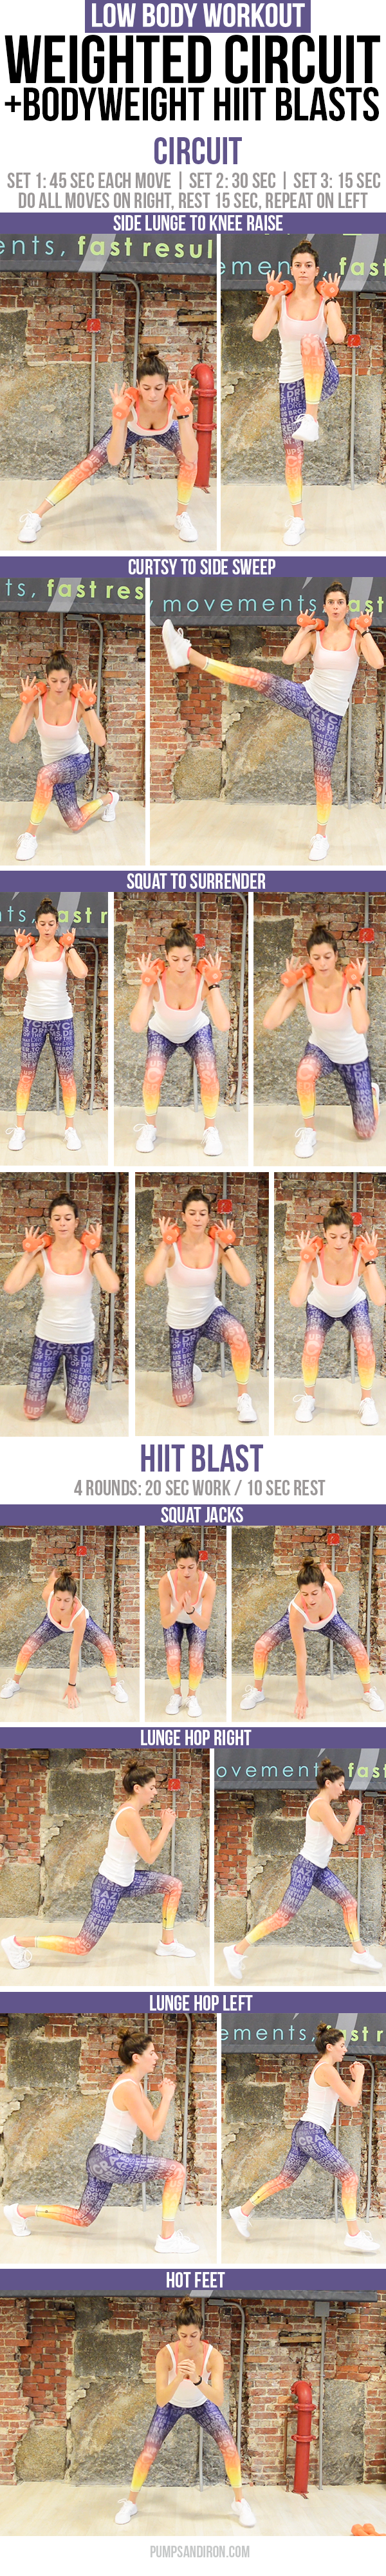 Low Body Circuit Workout with HIIT Blasts - you'll just need a set of weights and 15 minutes! (video included if you want to follow along at home)